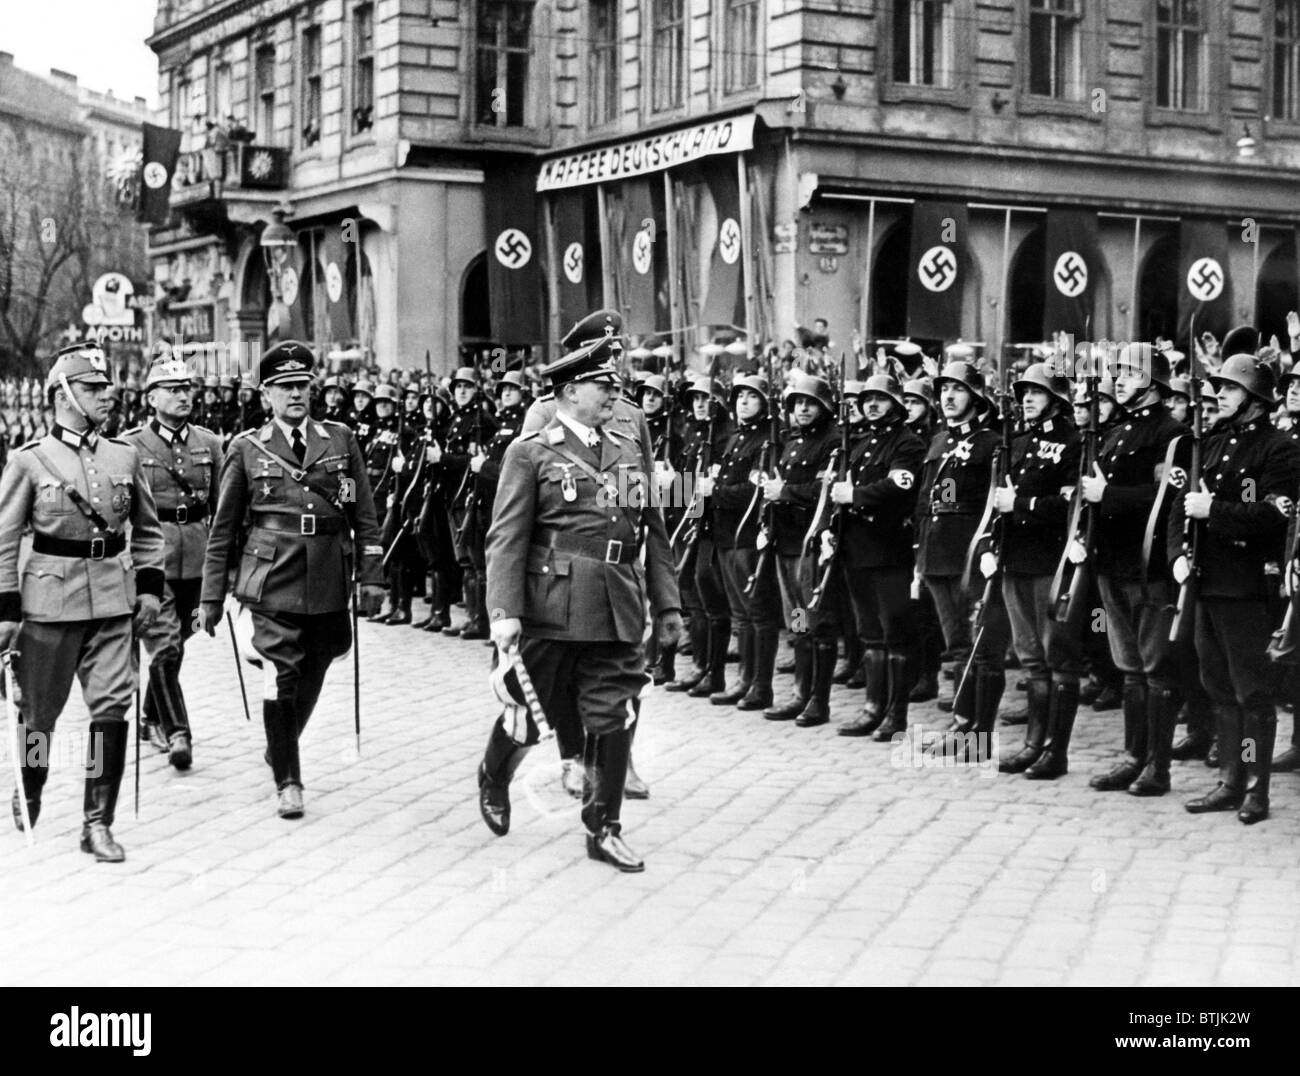 Hermann Goering, (foreground, center), greeting Vienna Police officers who are lined up in front of his hotel, Austria, 1938. Stock Photo